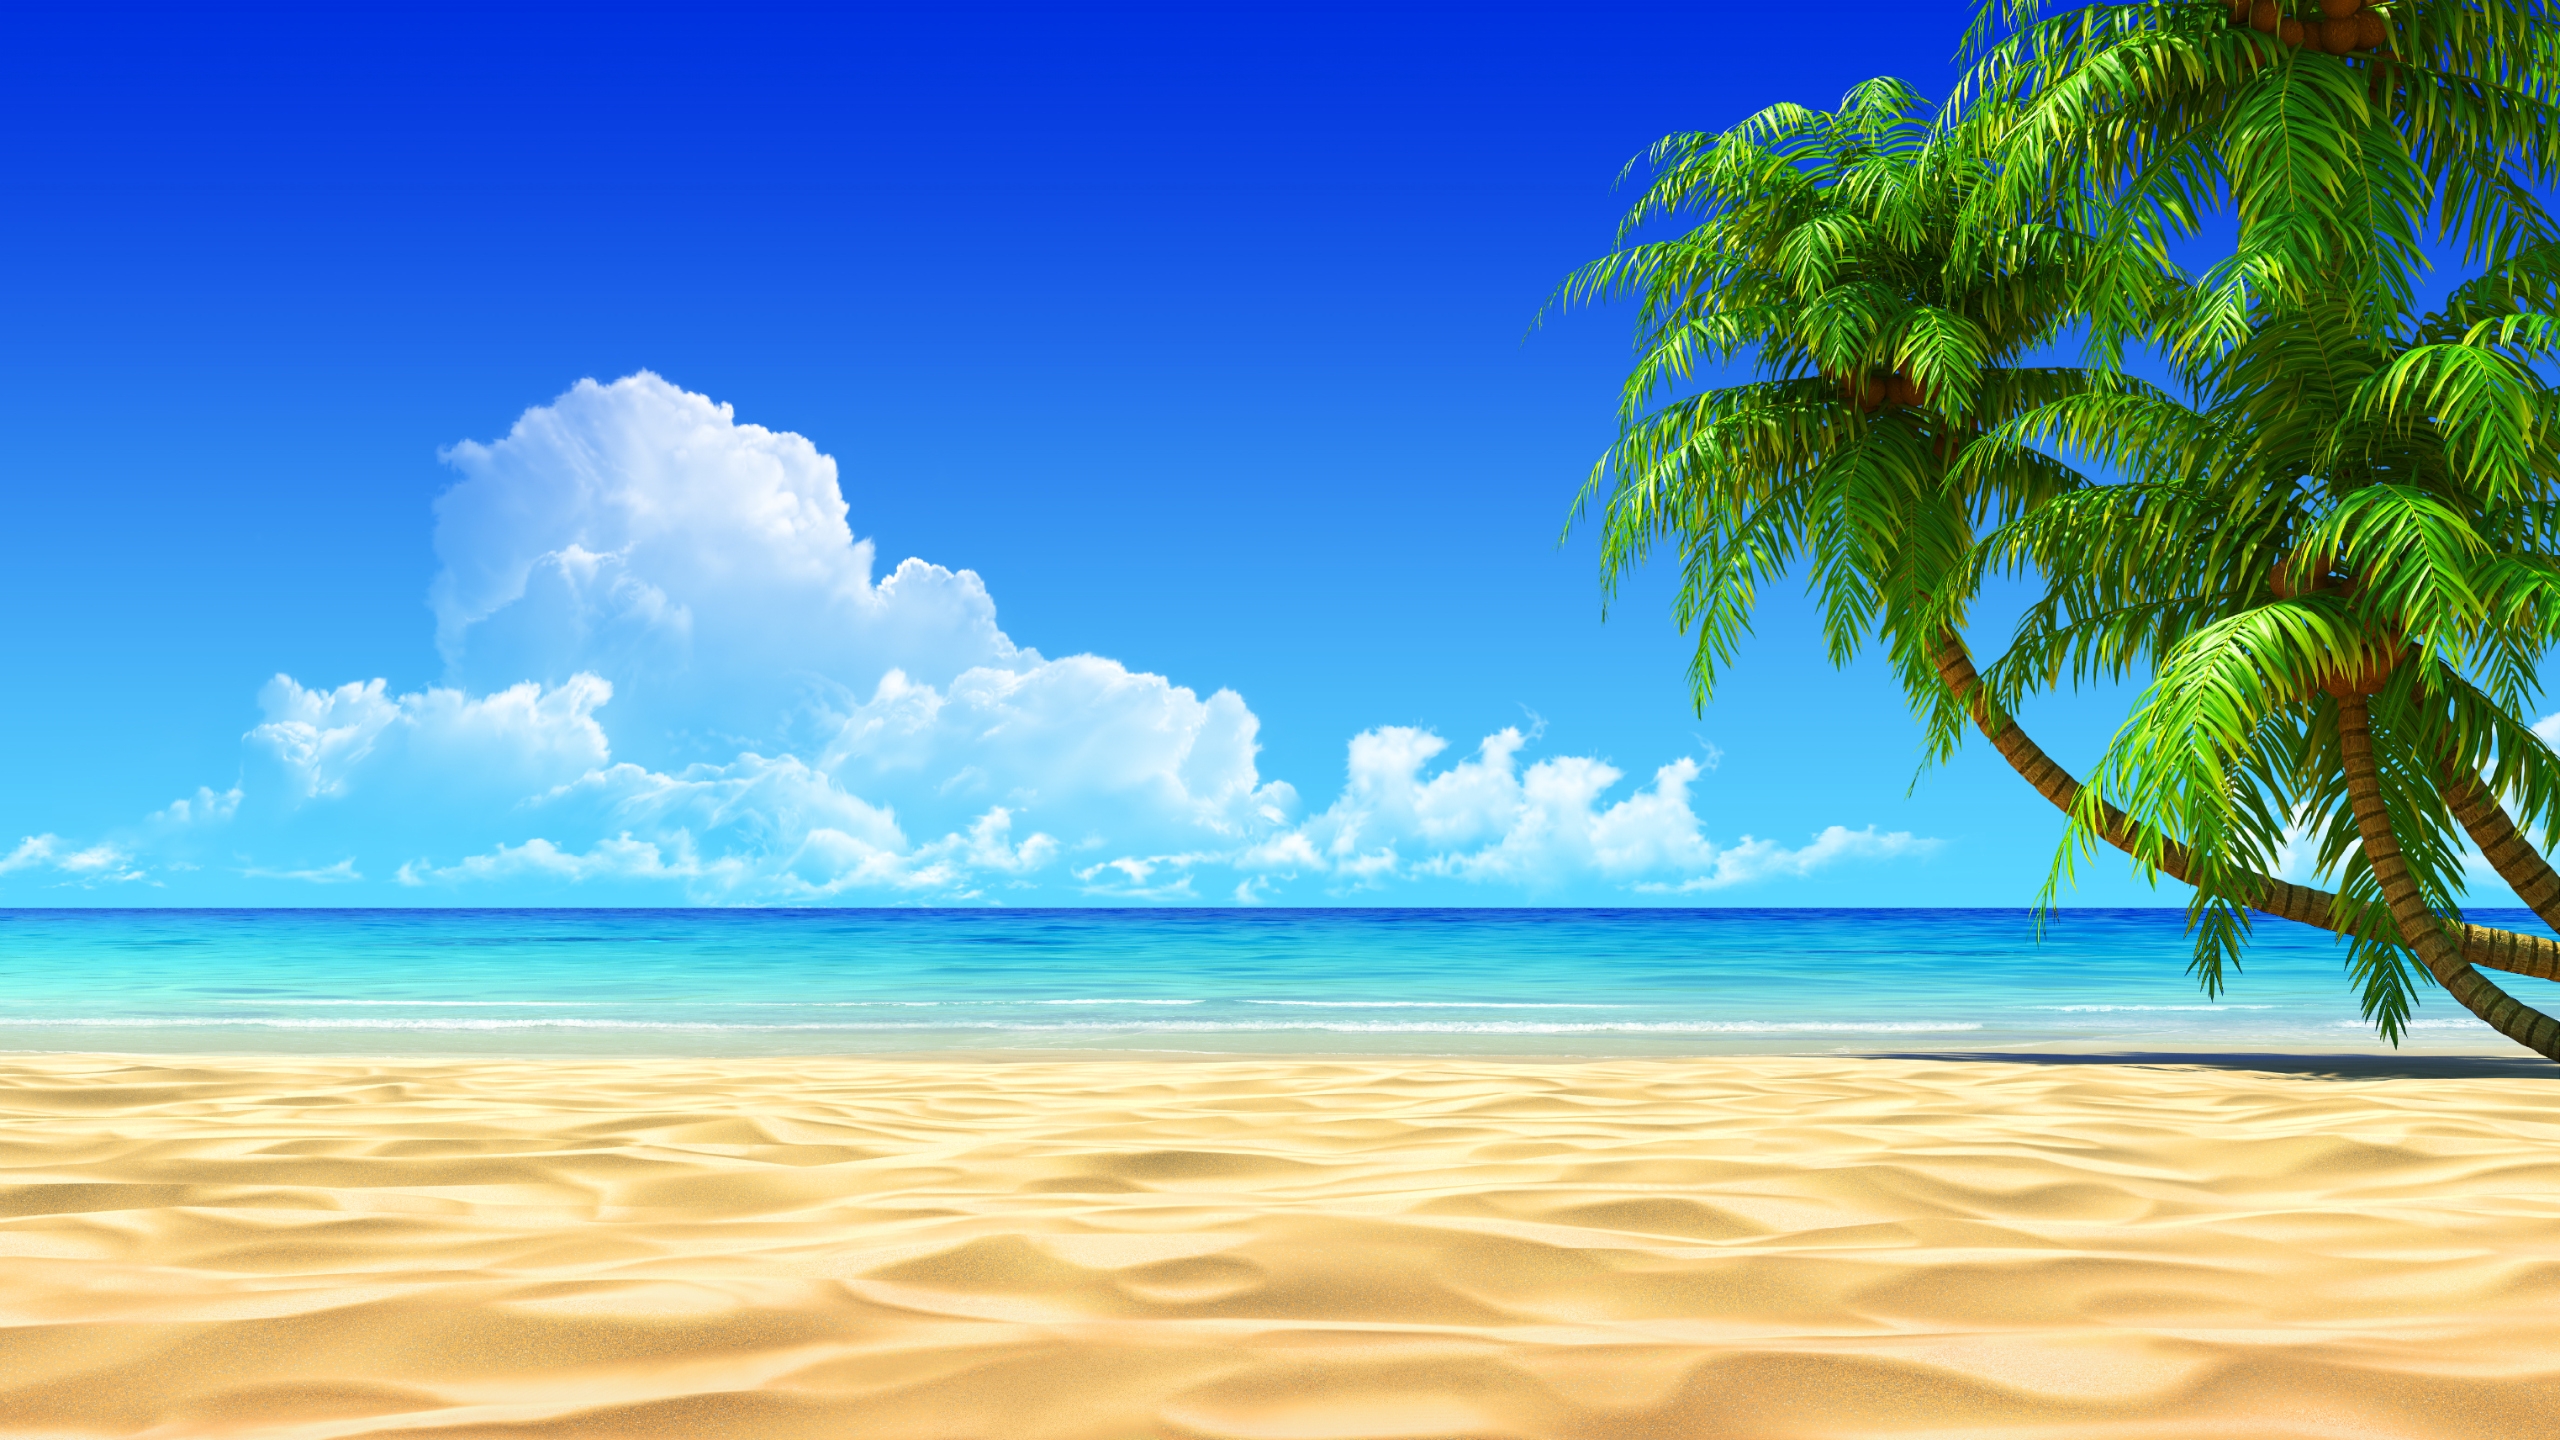 Background Full HD Images Free Download 